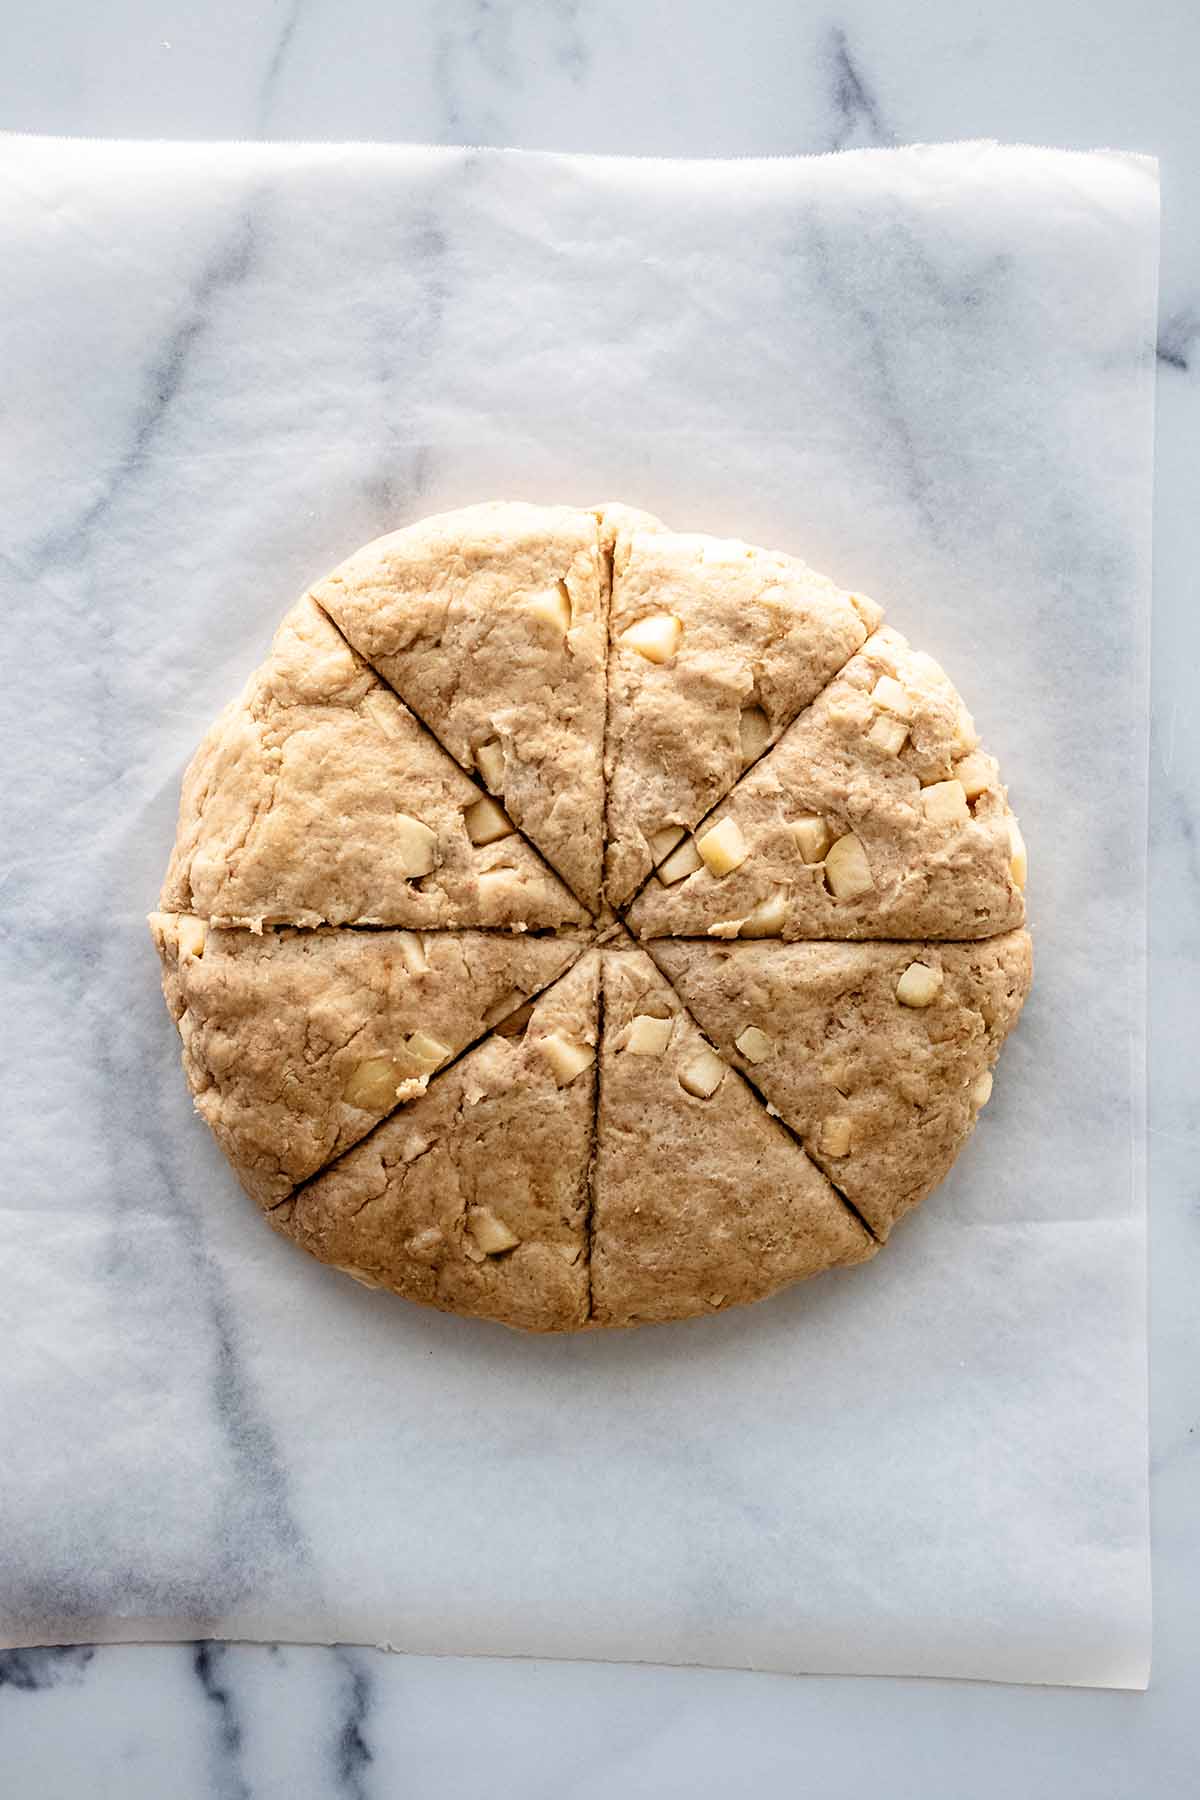 Overhead view of disc of scone dough cut into 8 triangles